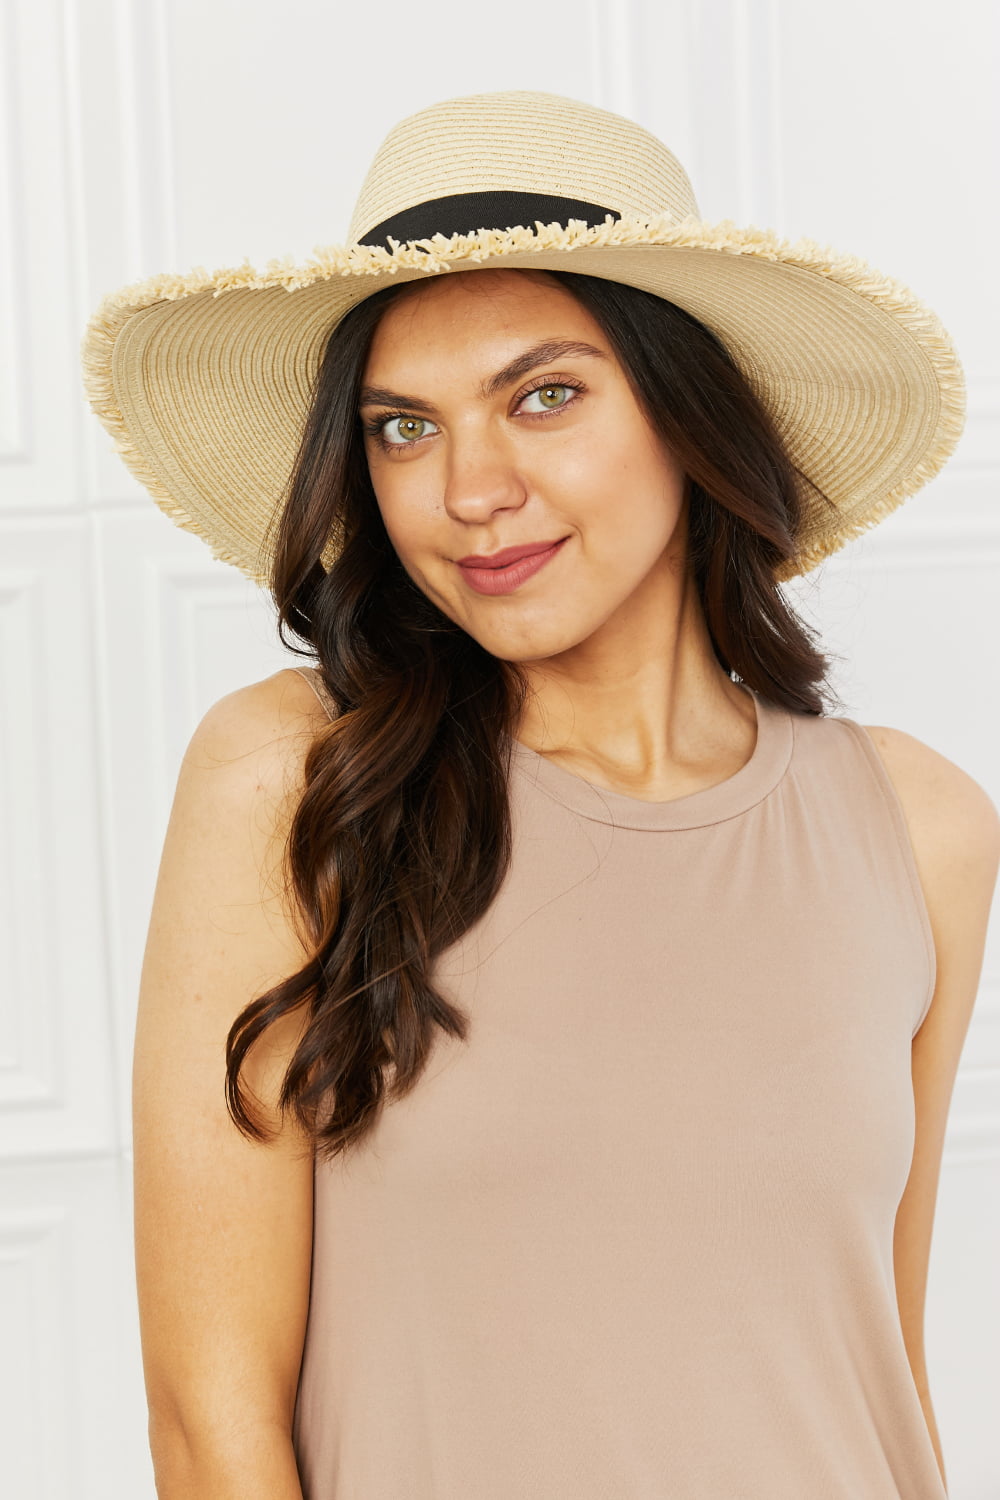 Straw Hat: A classic and versatile hat made from straw, ideal for staying cool and stylish in sunny weather.